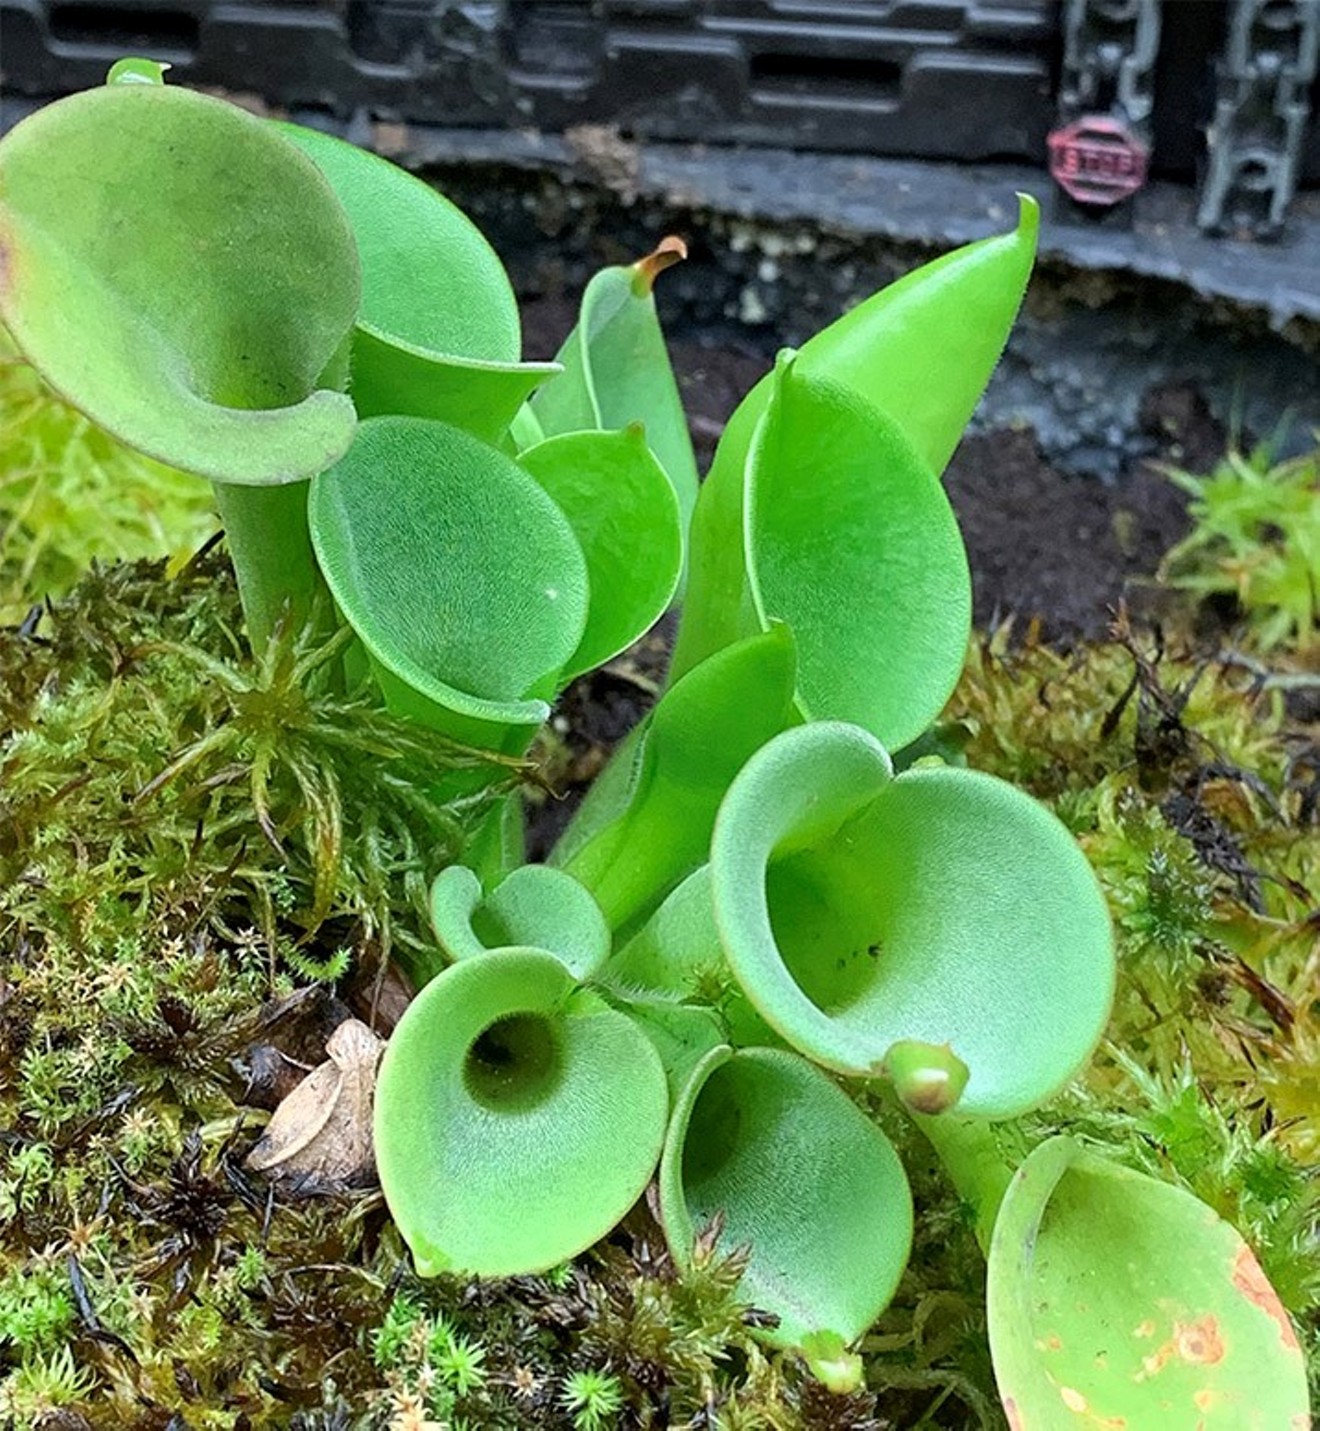 The Heliamphora minor plant nicknamed "Plowshare" is a South American marsh pitcher plant that eats small insects who fly into its tubular foliage.